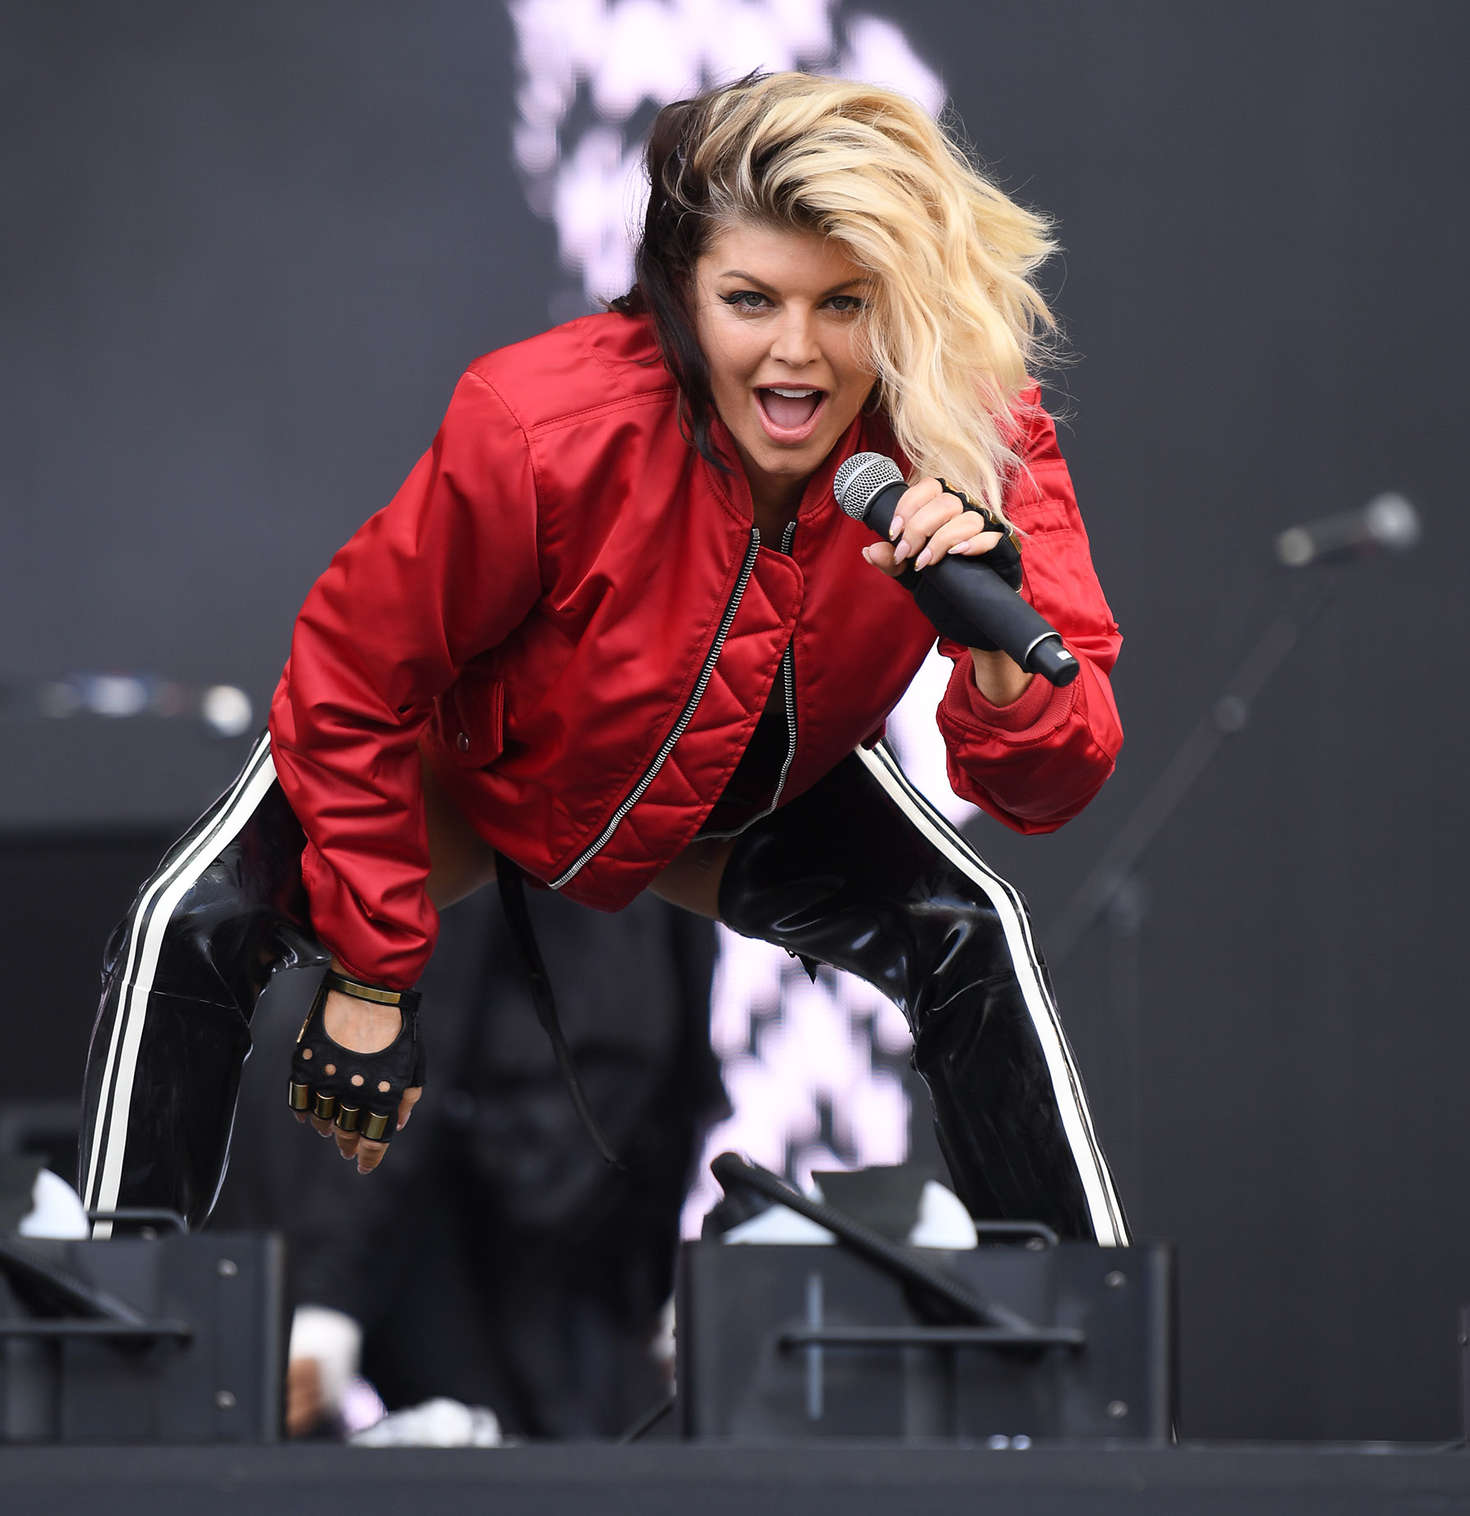 Fergie â€“ Performs at Wireless Festival 2016 in London